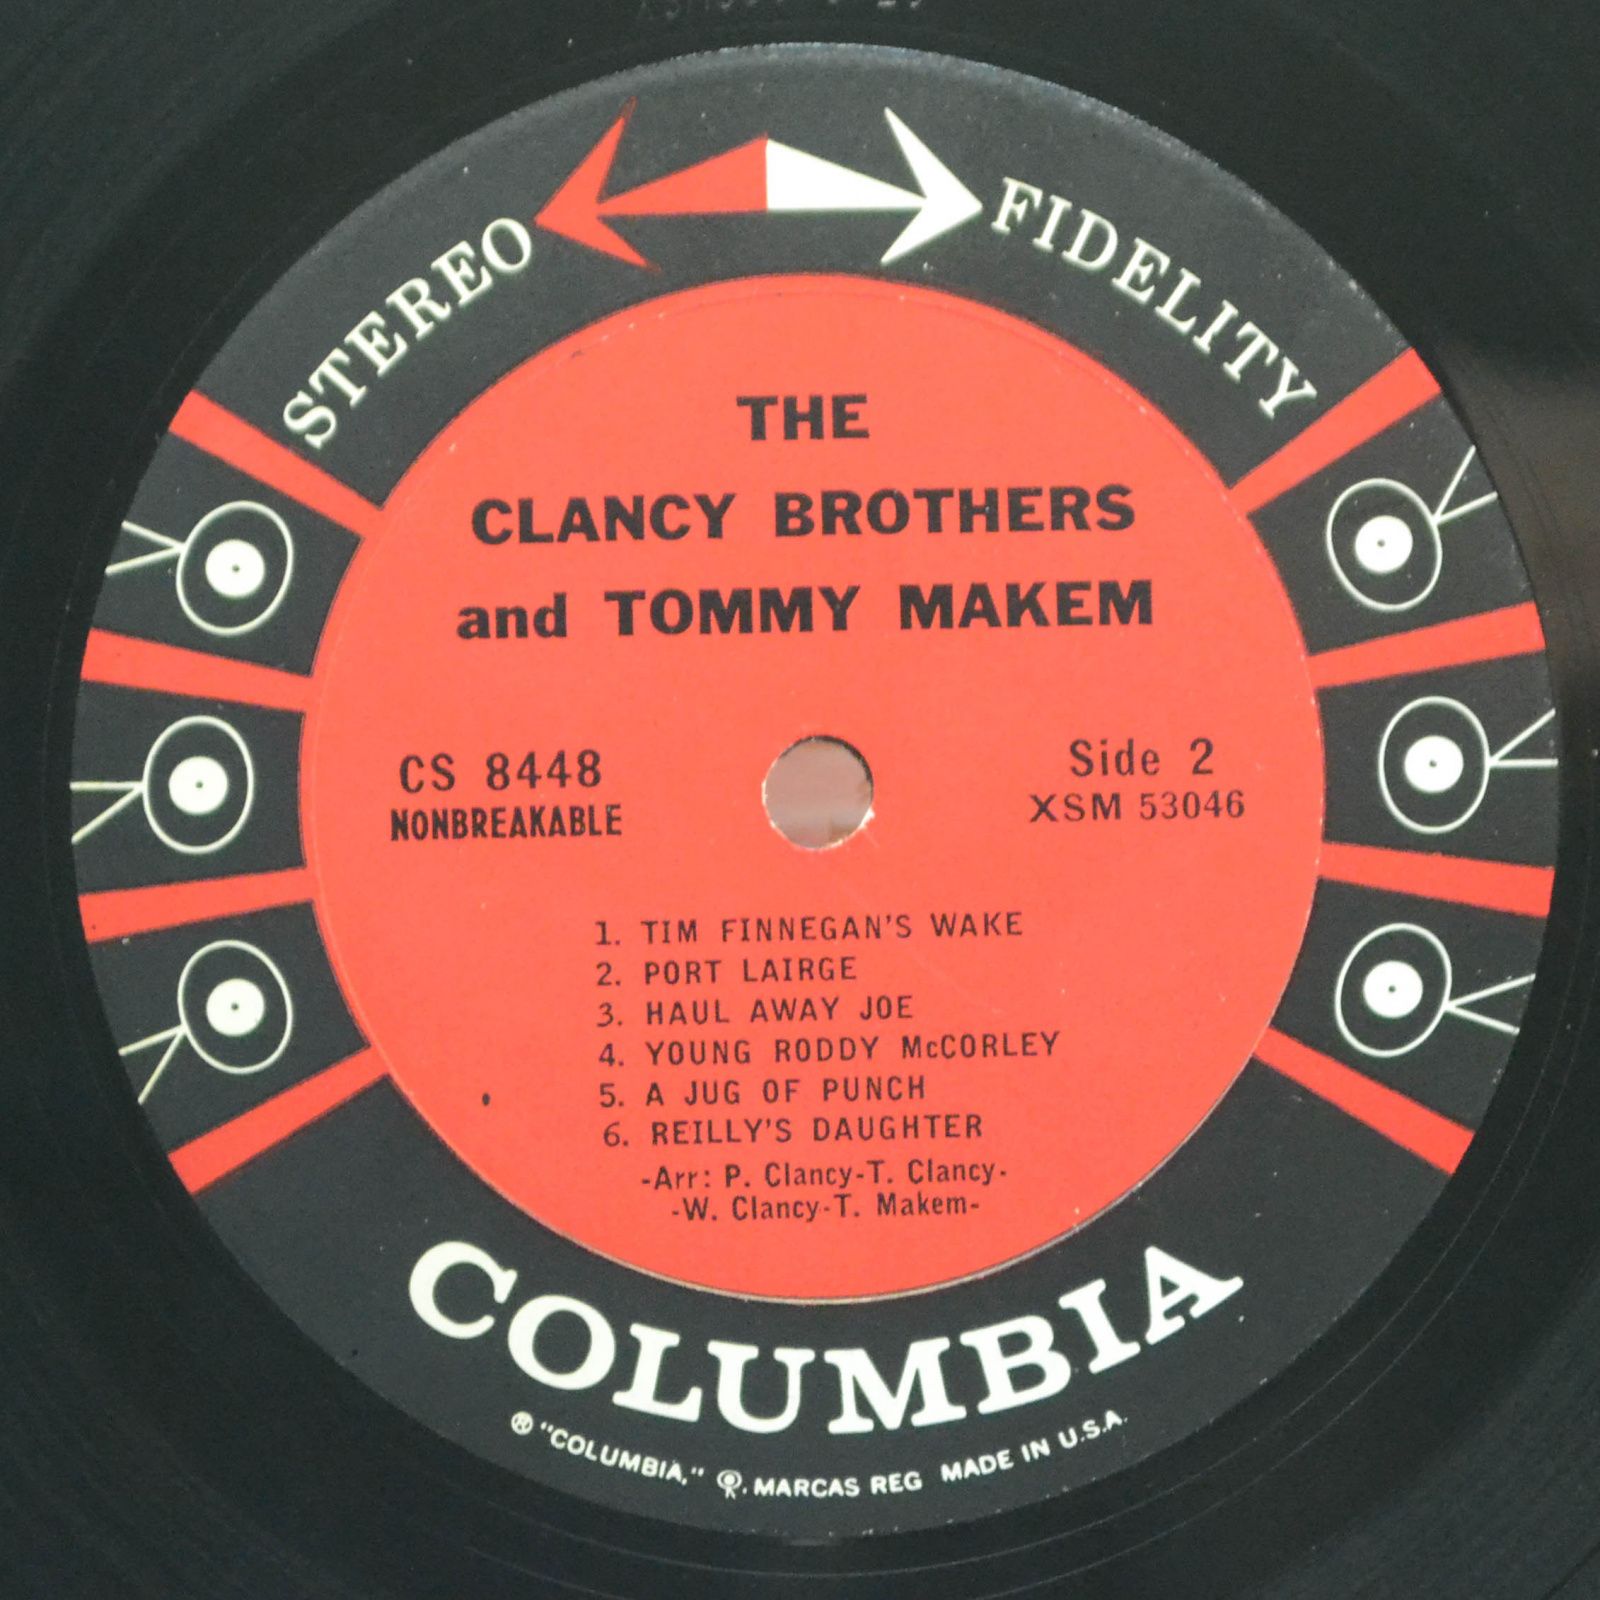 Clancy Brothers And Tommy Makem — A Spontaneous Performance Recording!, 1961